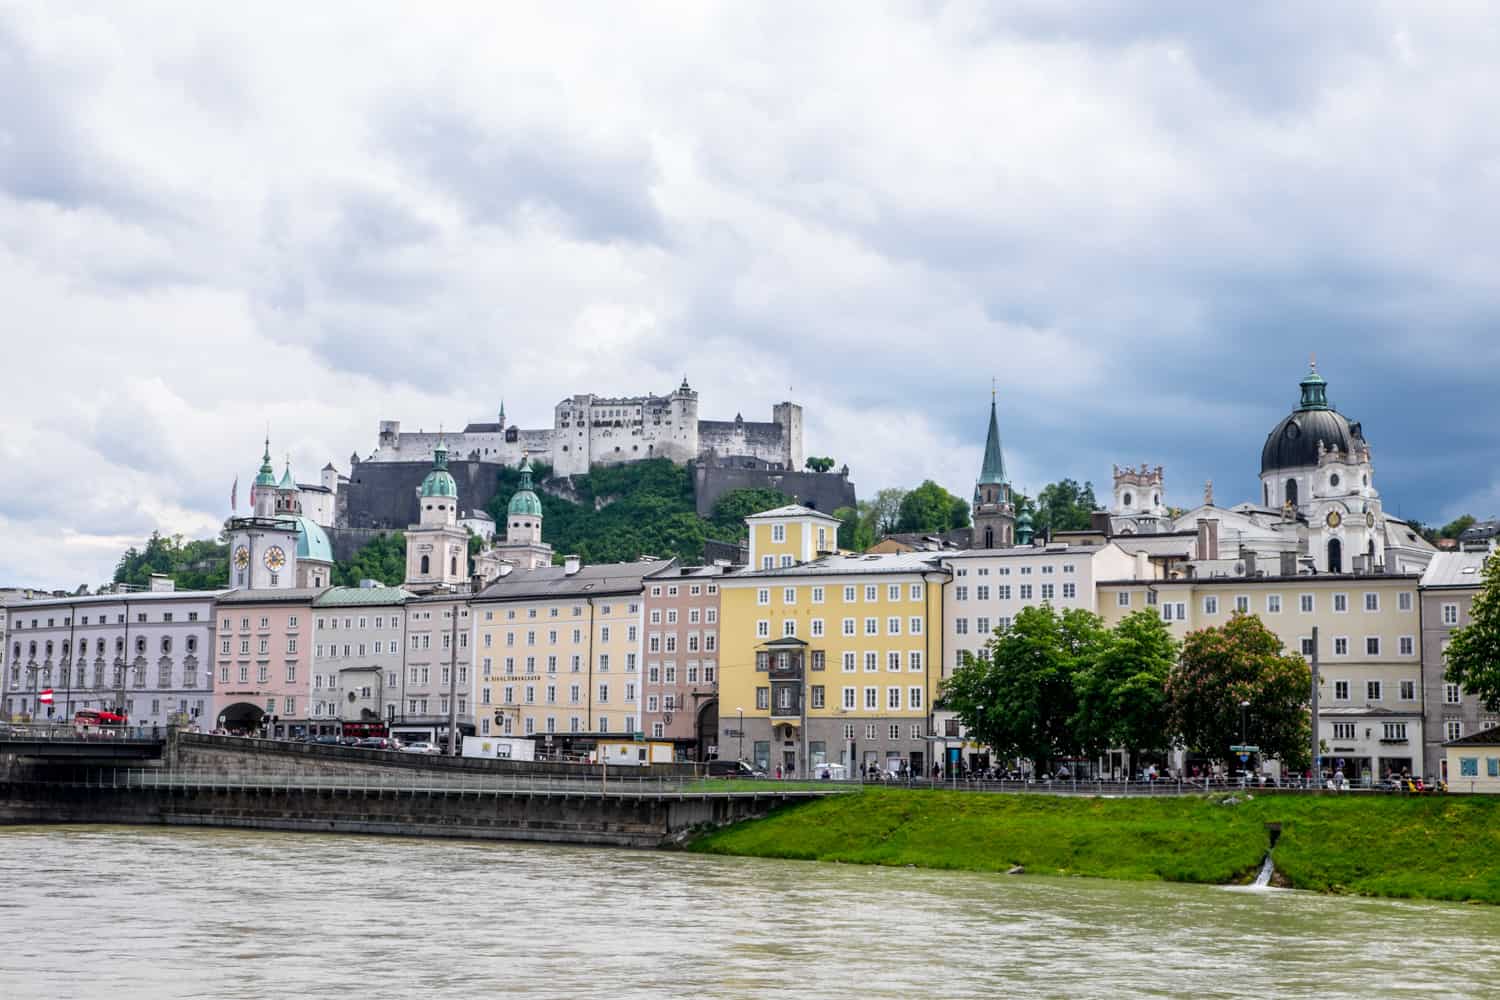 A row of rectangular buildings in pastel colours, spires and towers with mint green roofs and a castle complex on a hill - a riverside view of the UNESCO World Heritage Site of Salzburg city.